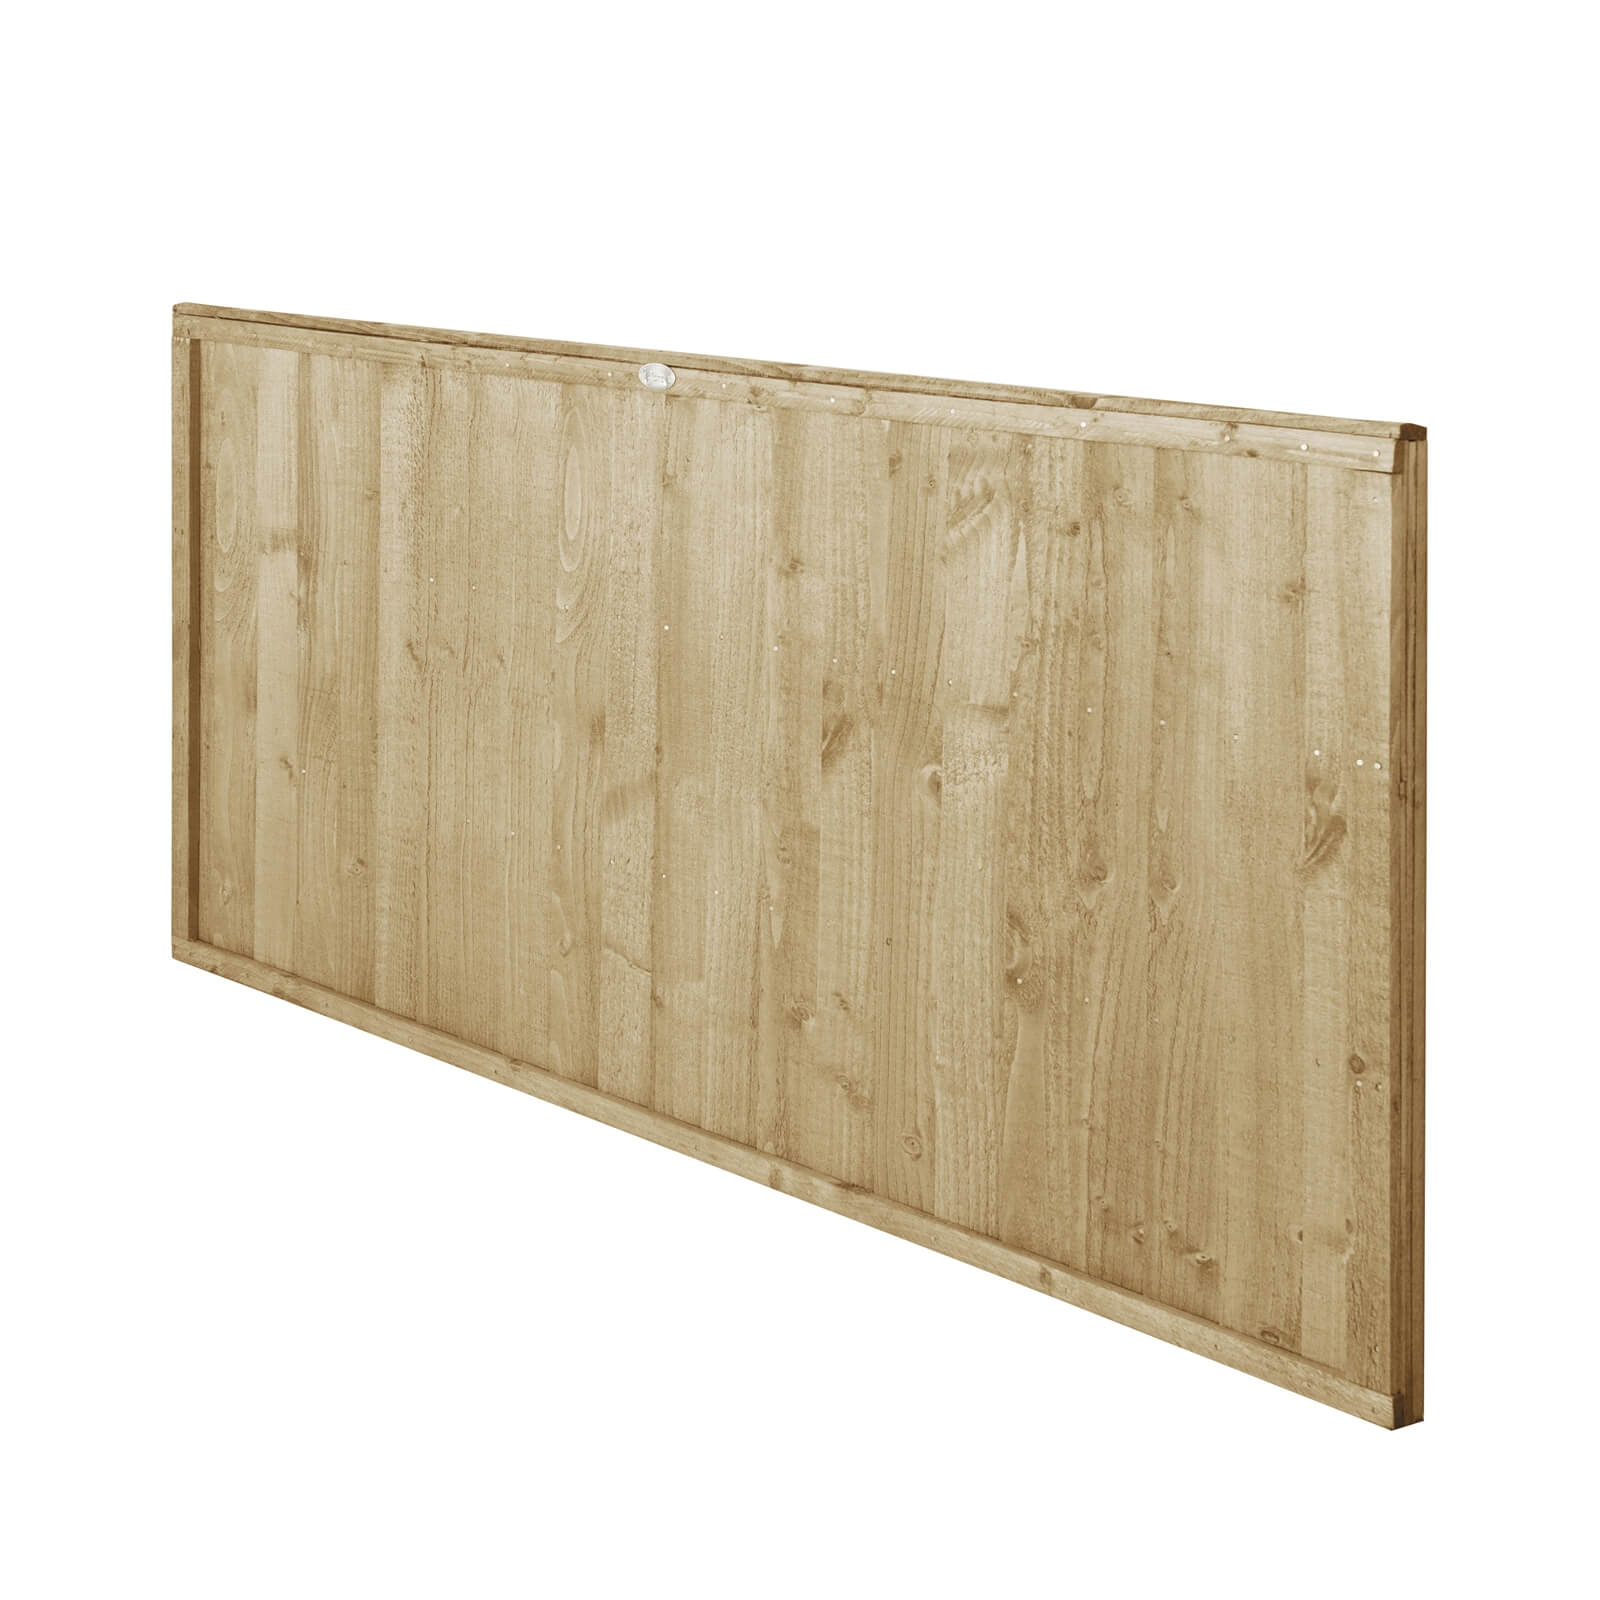 6ft x 3ft (1.83m x 0.91m) Pressure Treated Closeboard Fence Panel - Pack of 20